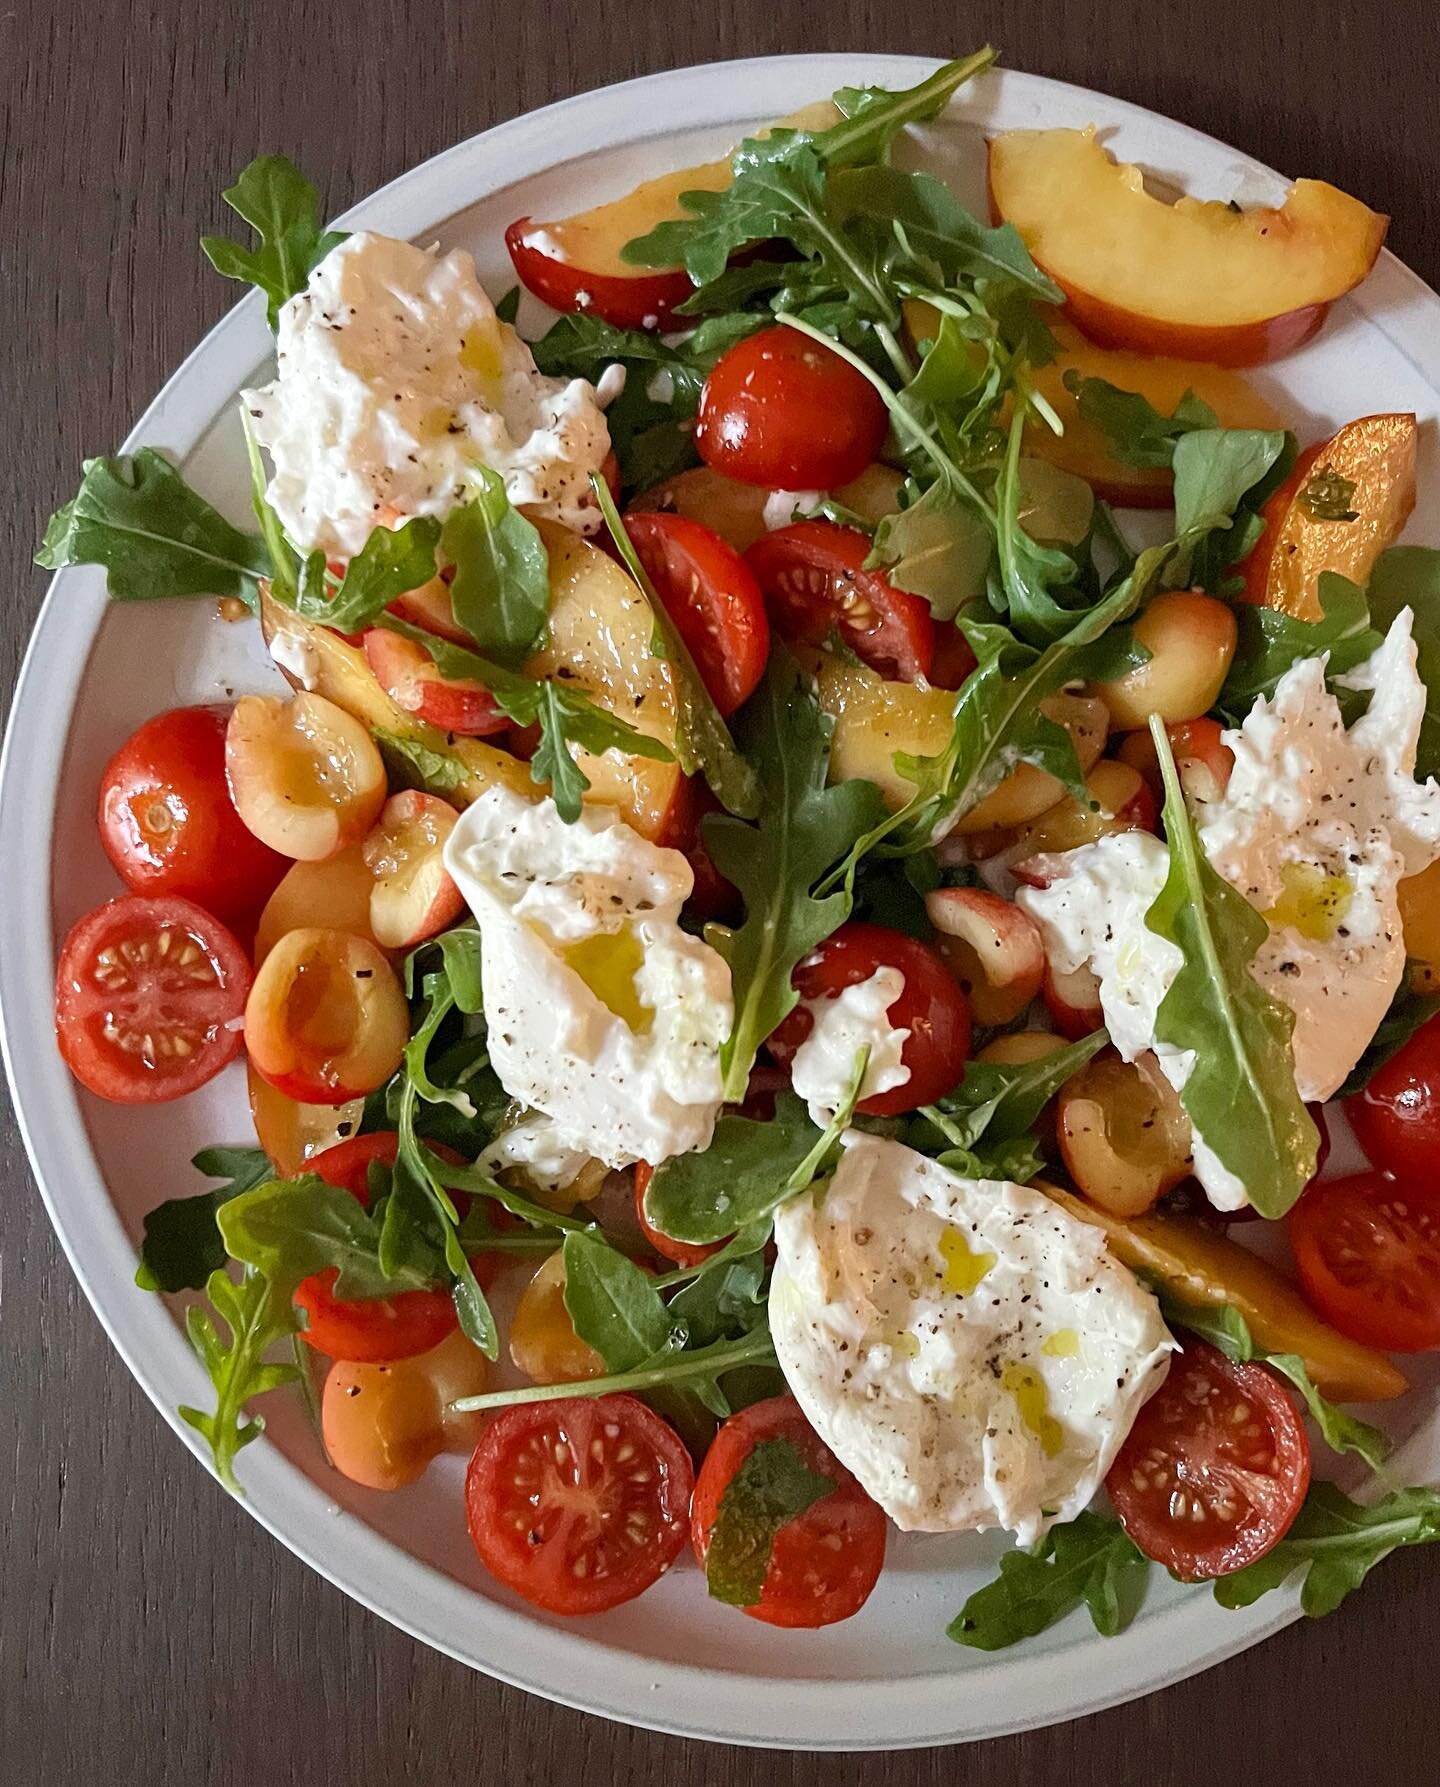 Again and again and again: stone fruit, tomatoes, handful of greens, herbs, burrata. Splash of olive oil and good vinegar, s&amp;p. Summer at its best. #summereating #summersalad #stonefruit #salad #burrata